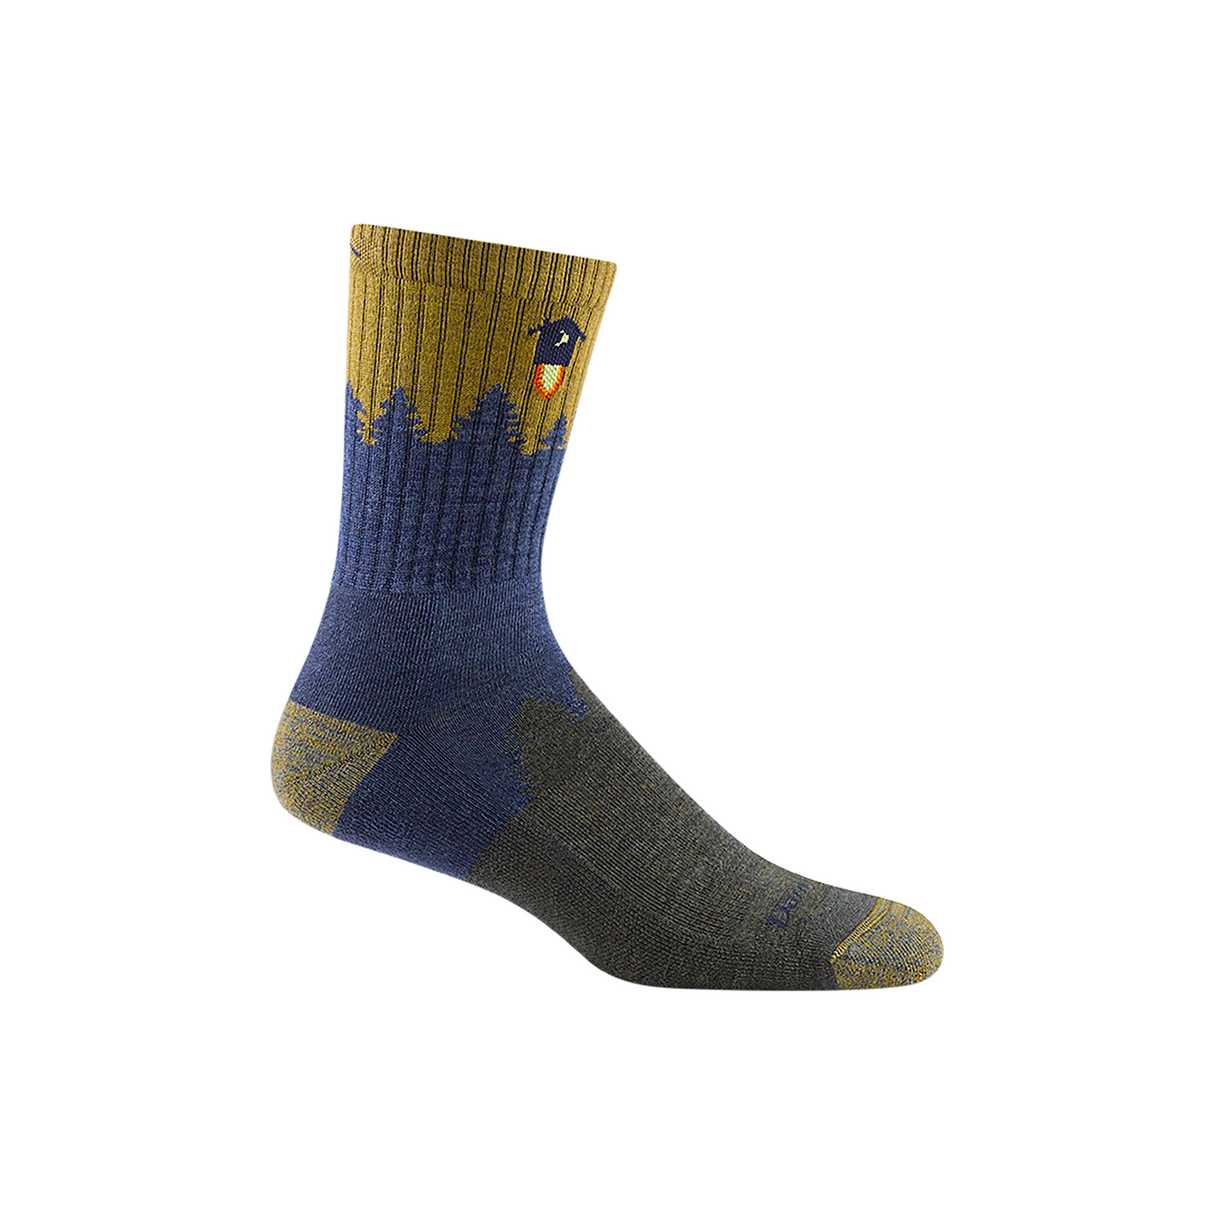 Darn Tough Number 2 Midweight Micro Crew Sock with Cushion (Men) - Denim Socks - Perf - Micro - The Heel Shoe Fitters